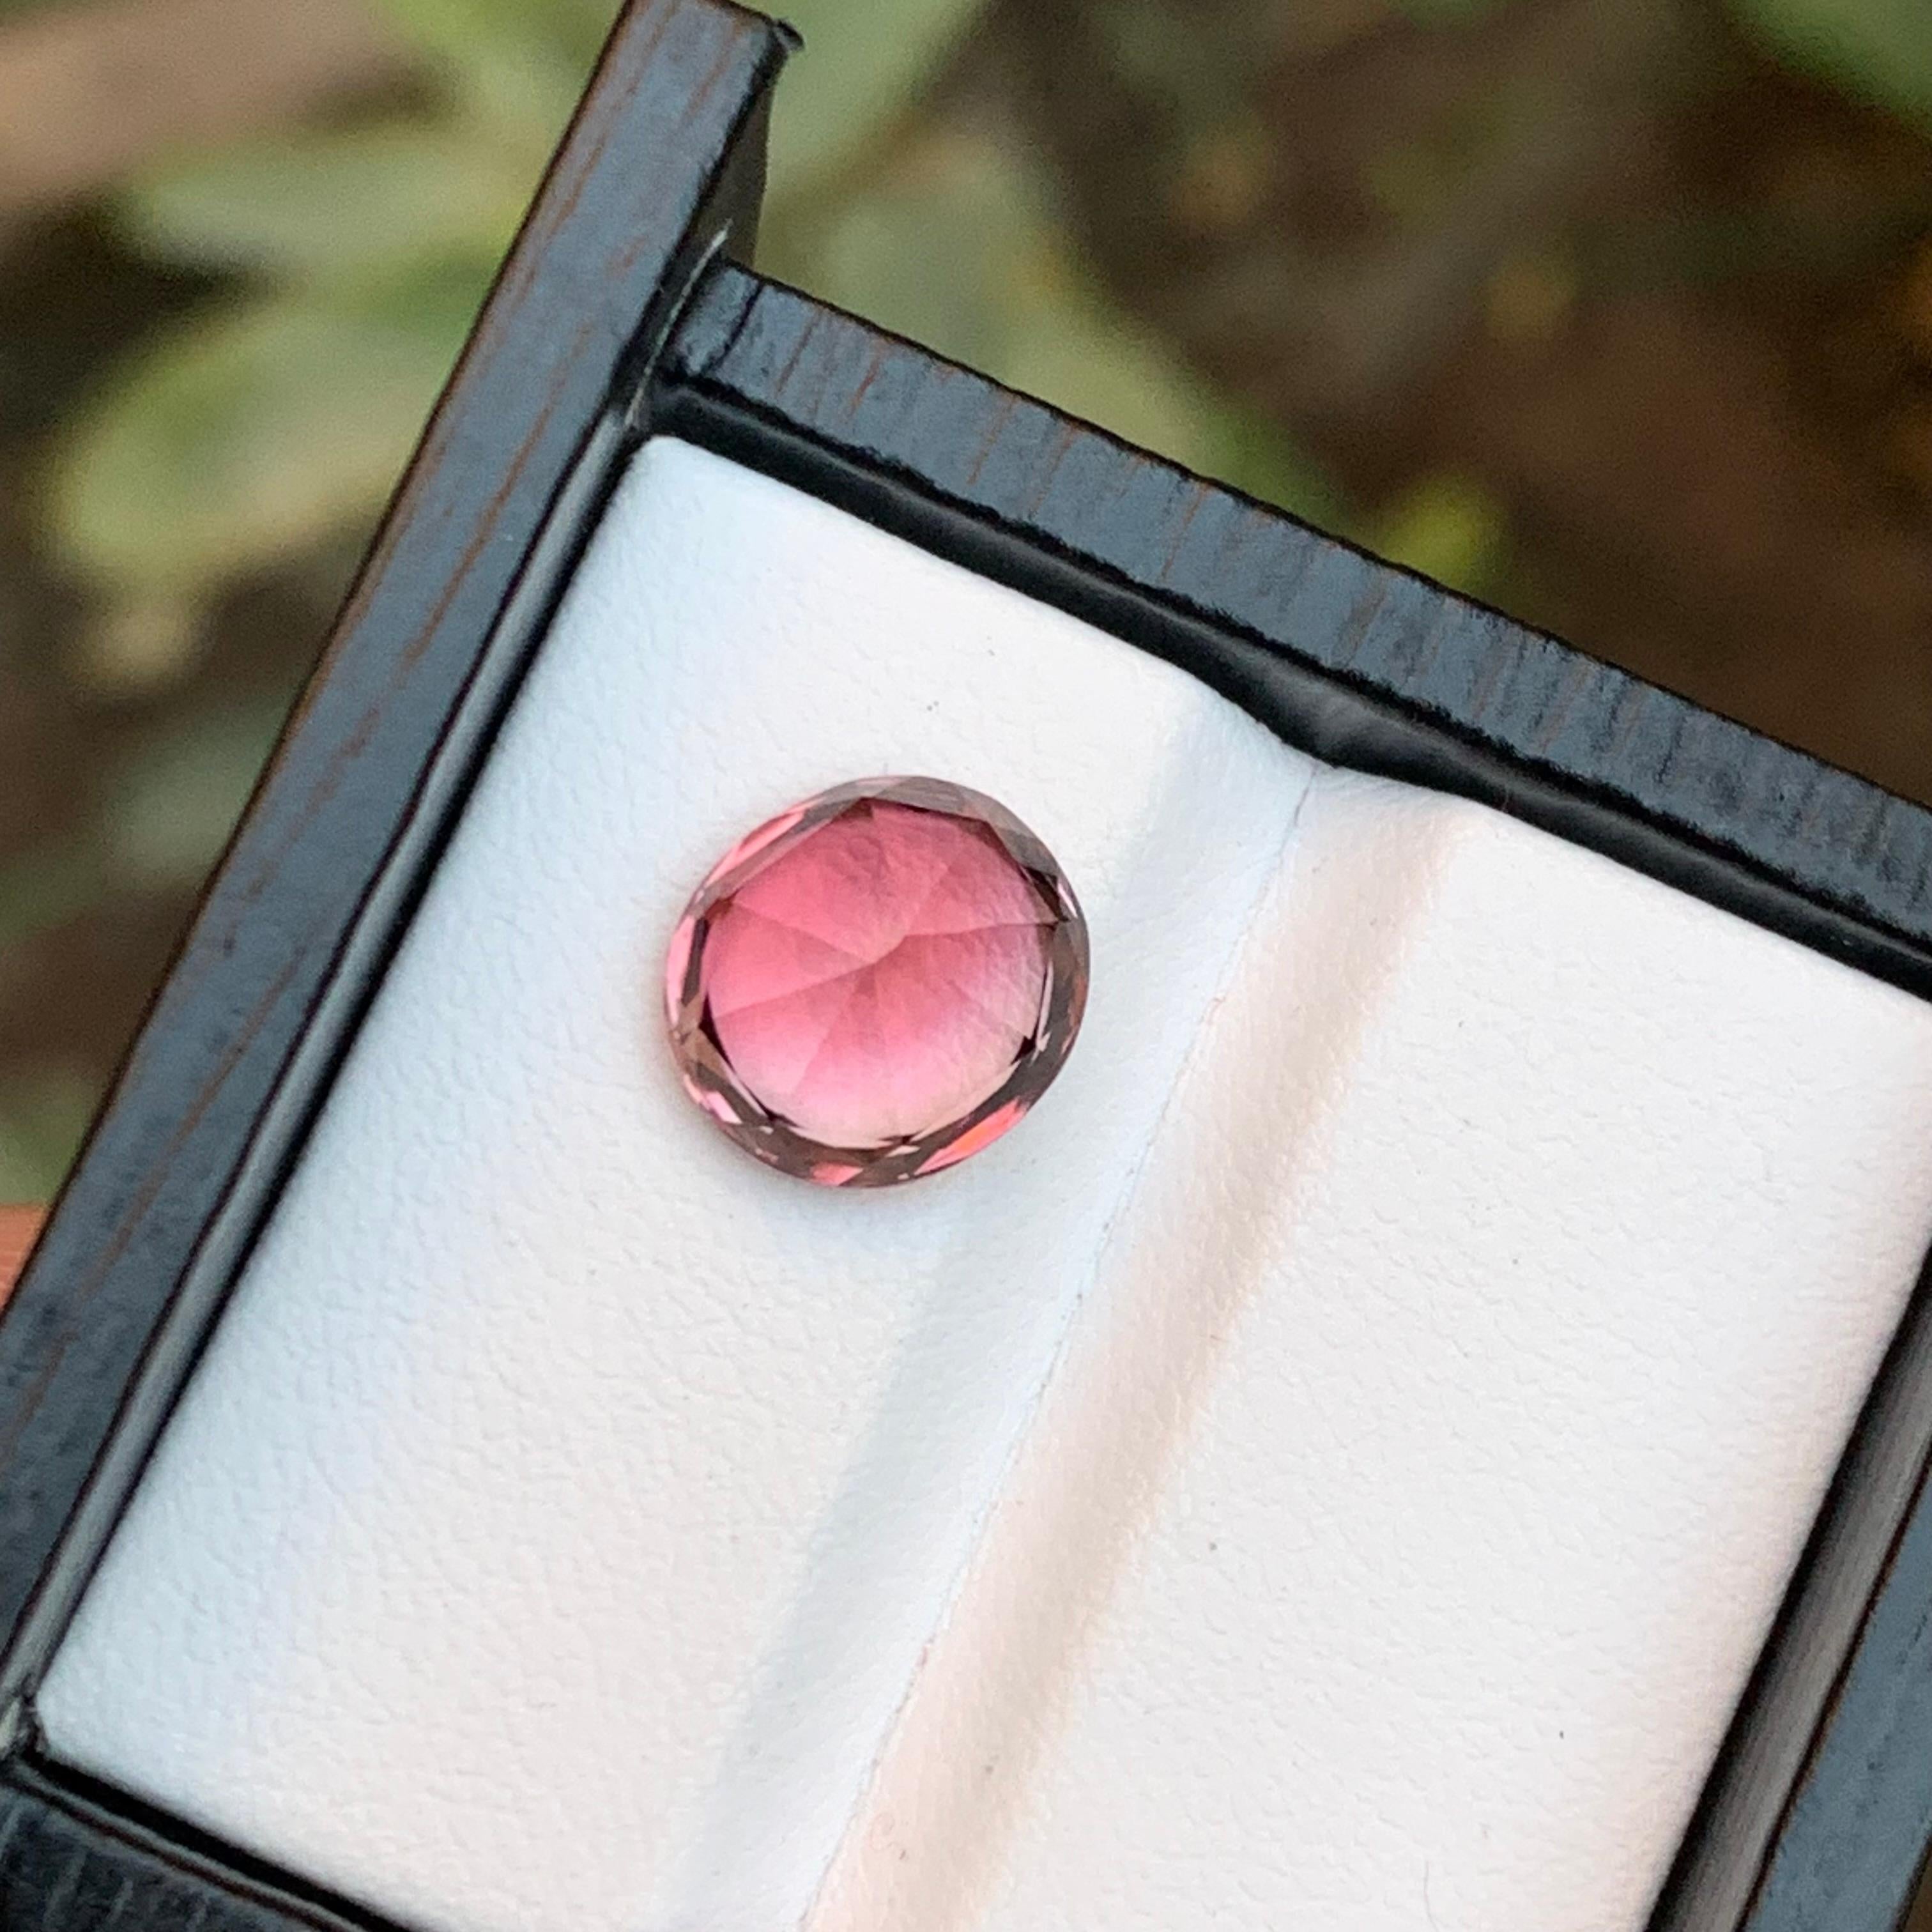 Rare Peachy Pink Natural Tourmaline Gemstone, 3.80 Ct Fancy Cushion Cut for Ring For Sale 1